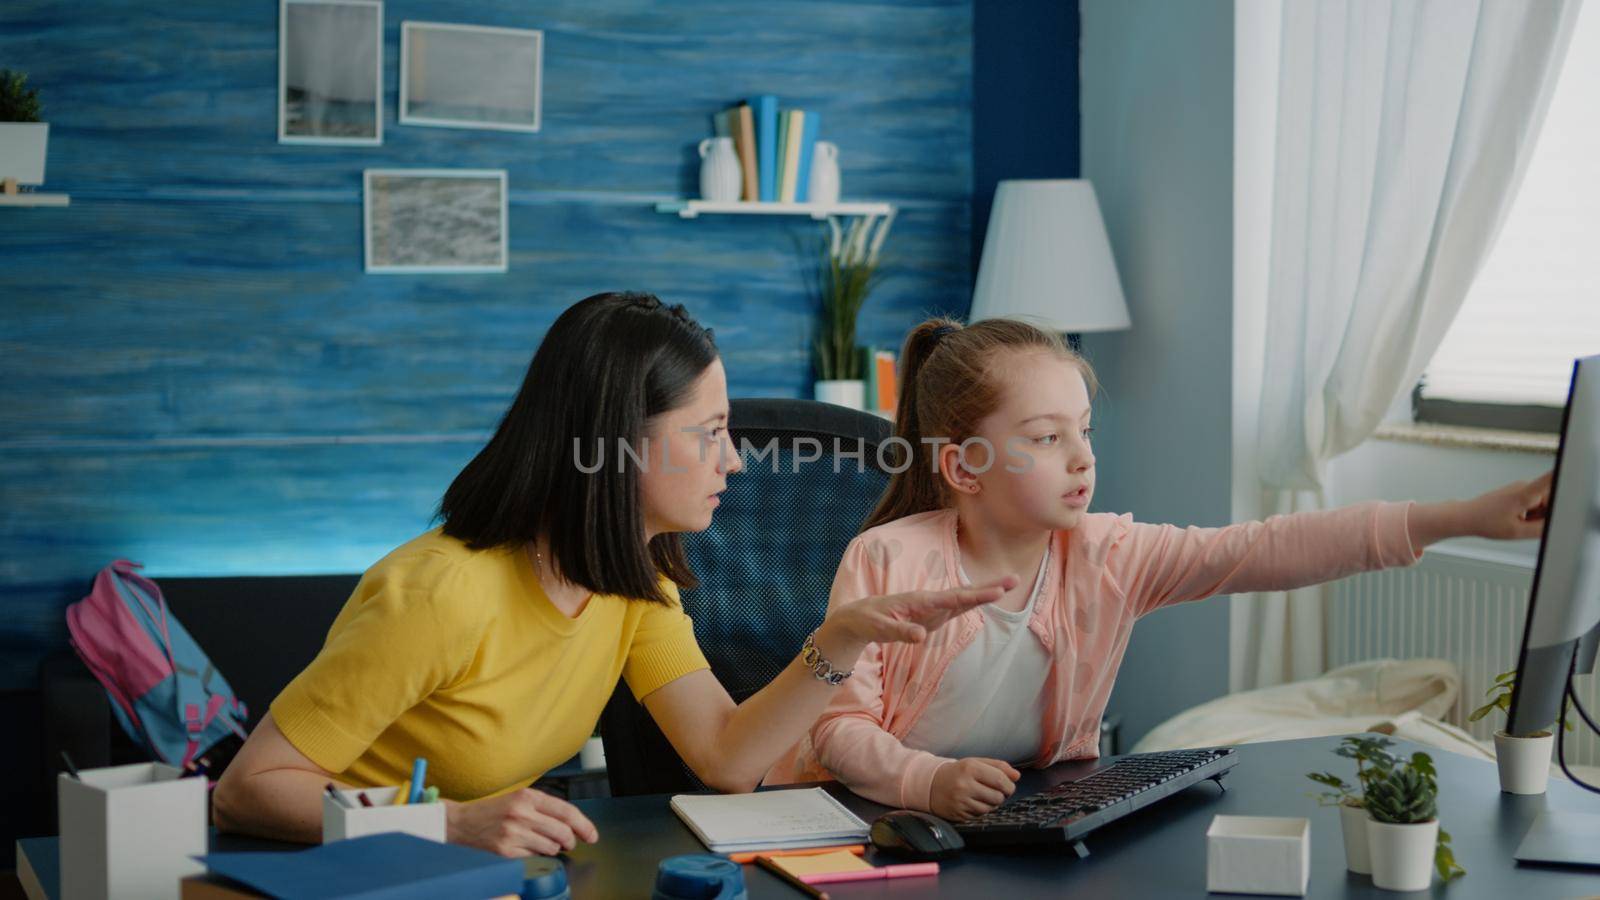 Parent and little girl doing homework together at desk and using computer with keyboard for online lesson. Mother helping daughter with school work and class tasks for remote education